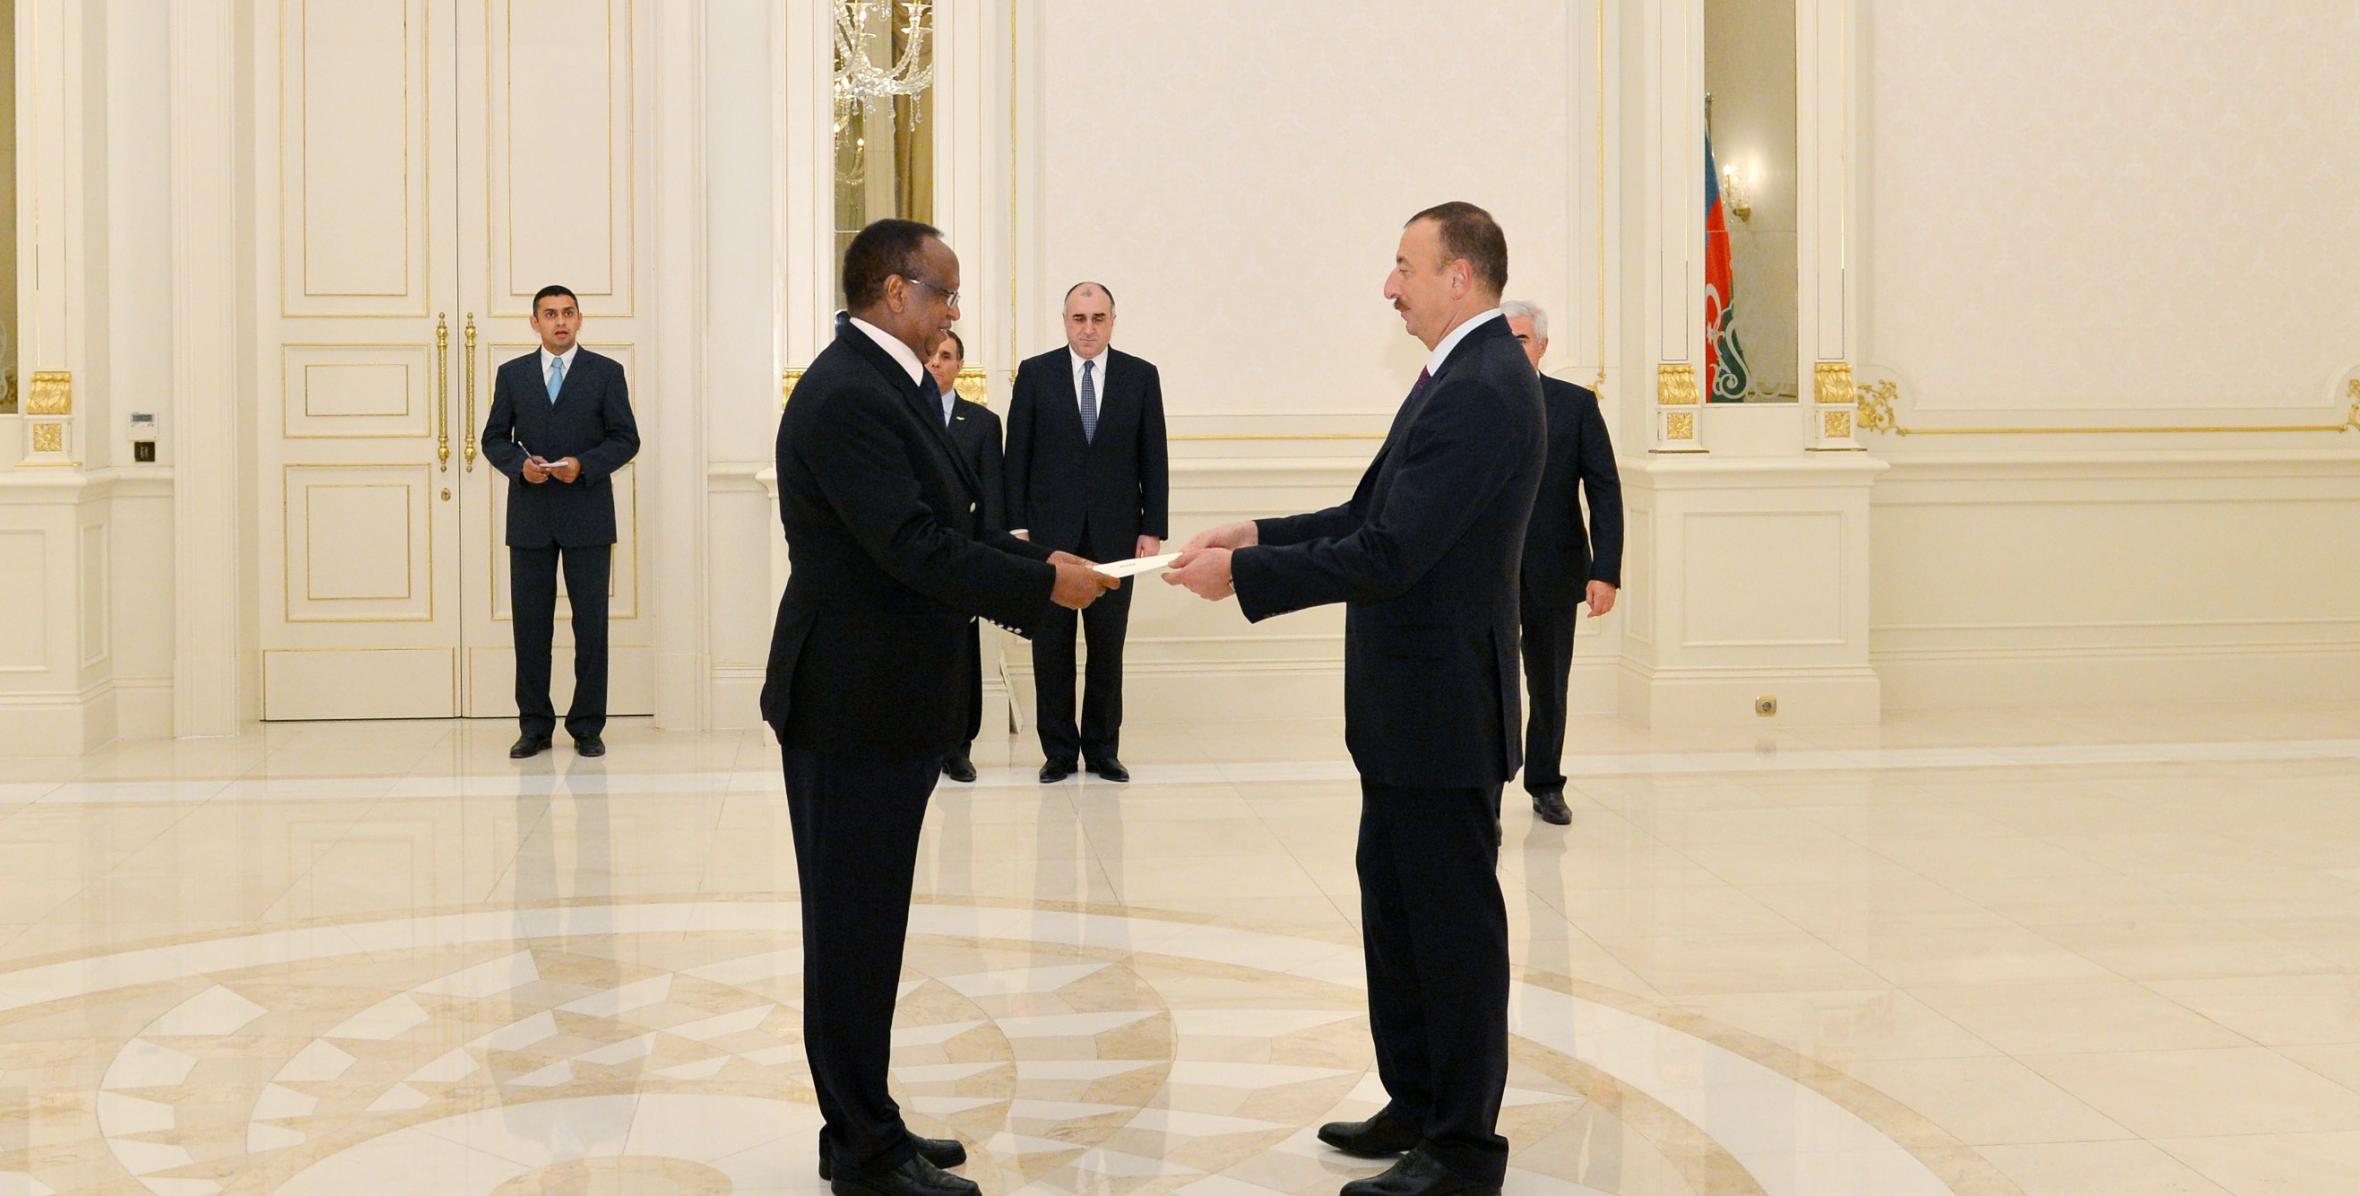 Ilham Aliyev has received the credentials of the newly-appointed ambassador of Djibouti to Azerbaijan